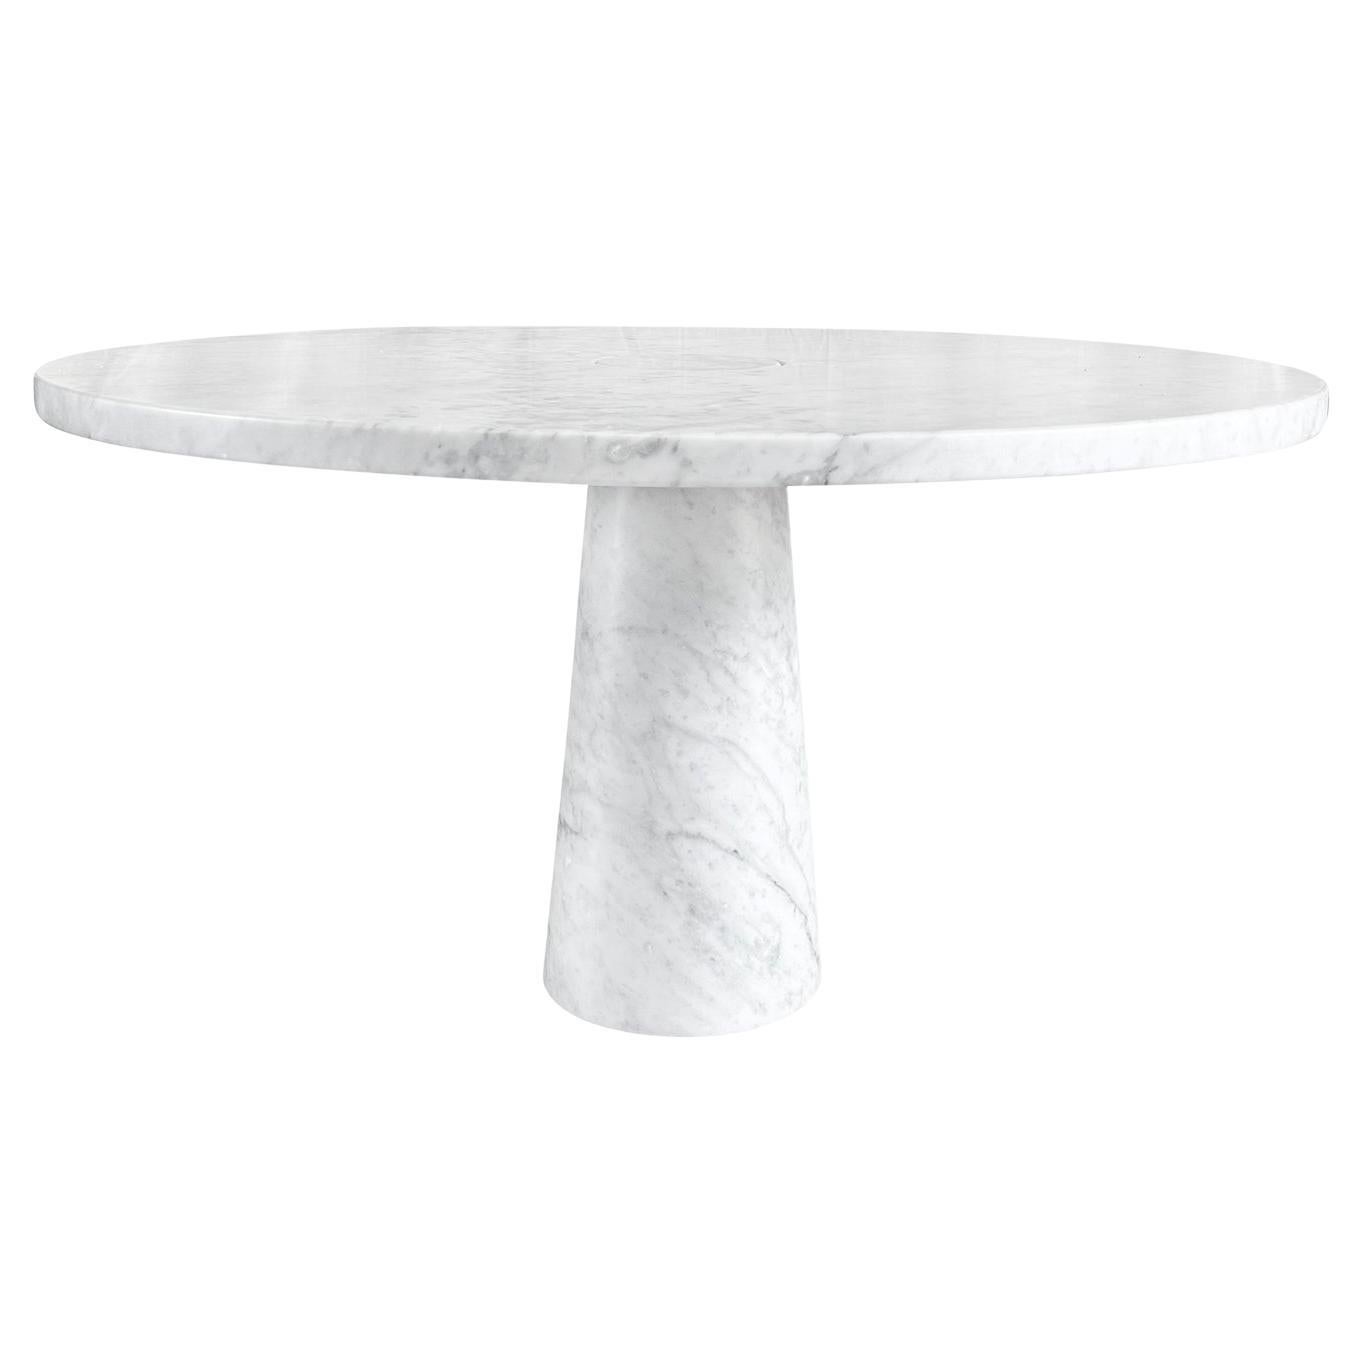 20th Century Italian Round Marble Dining Table by Angelo Mangiarotti & Skipper For Sale